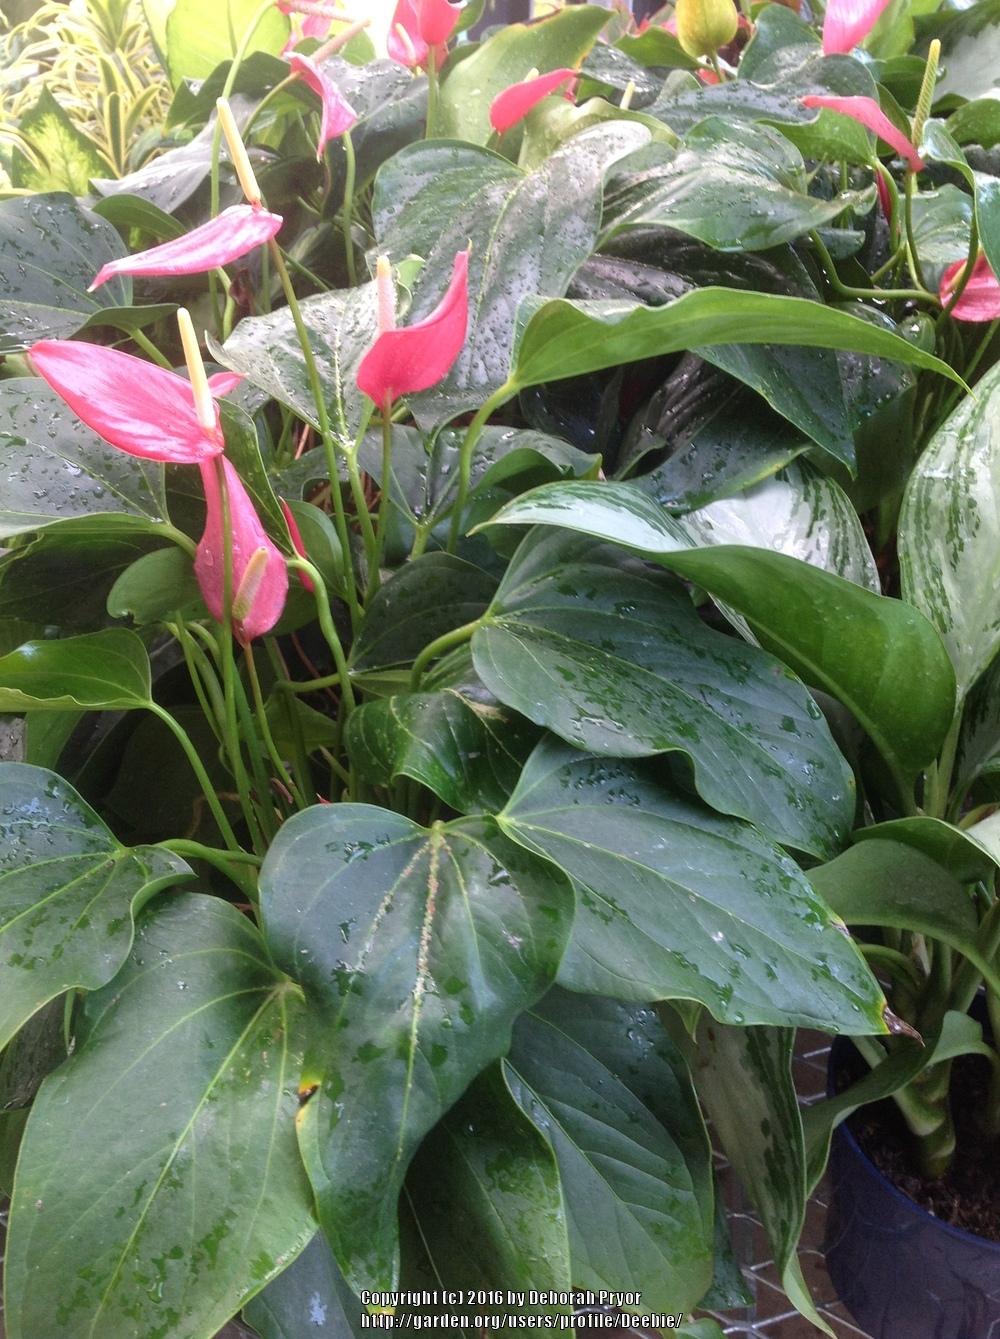 Photo of Anthuriums (Anthurium) uploaded by Deebie